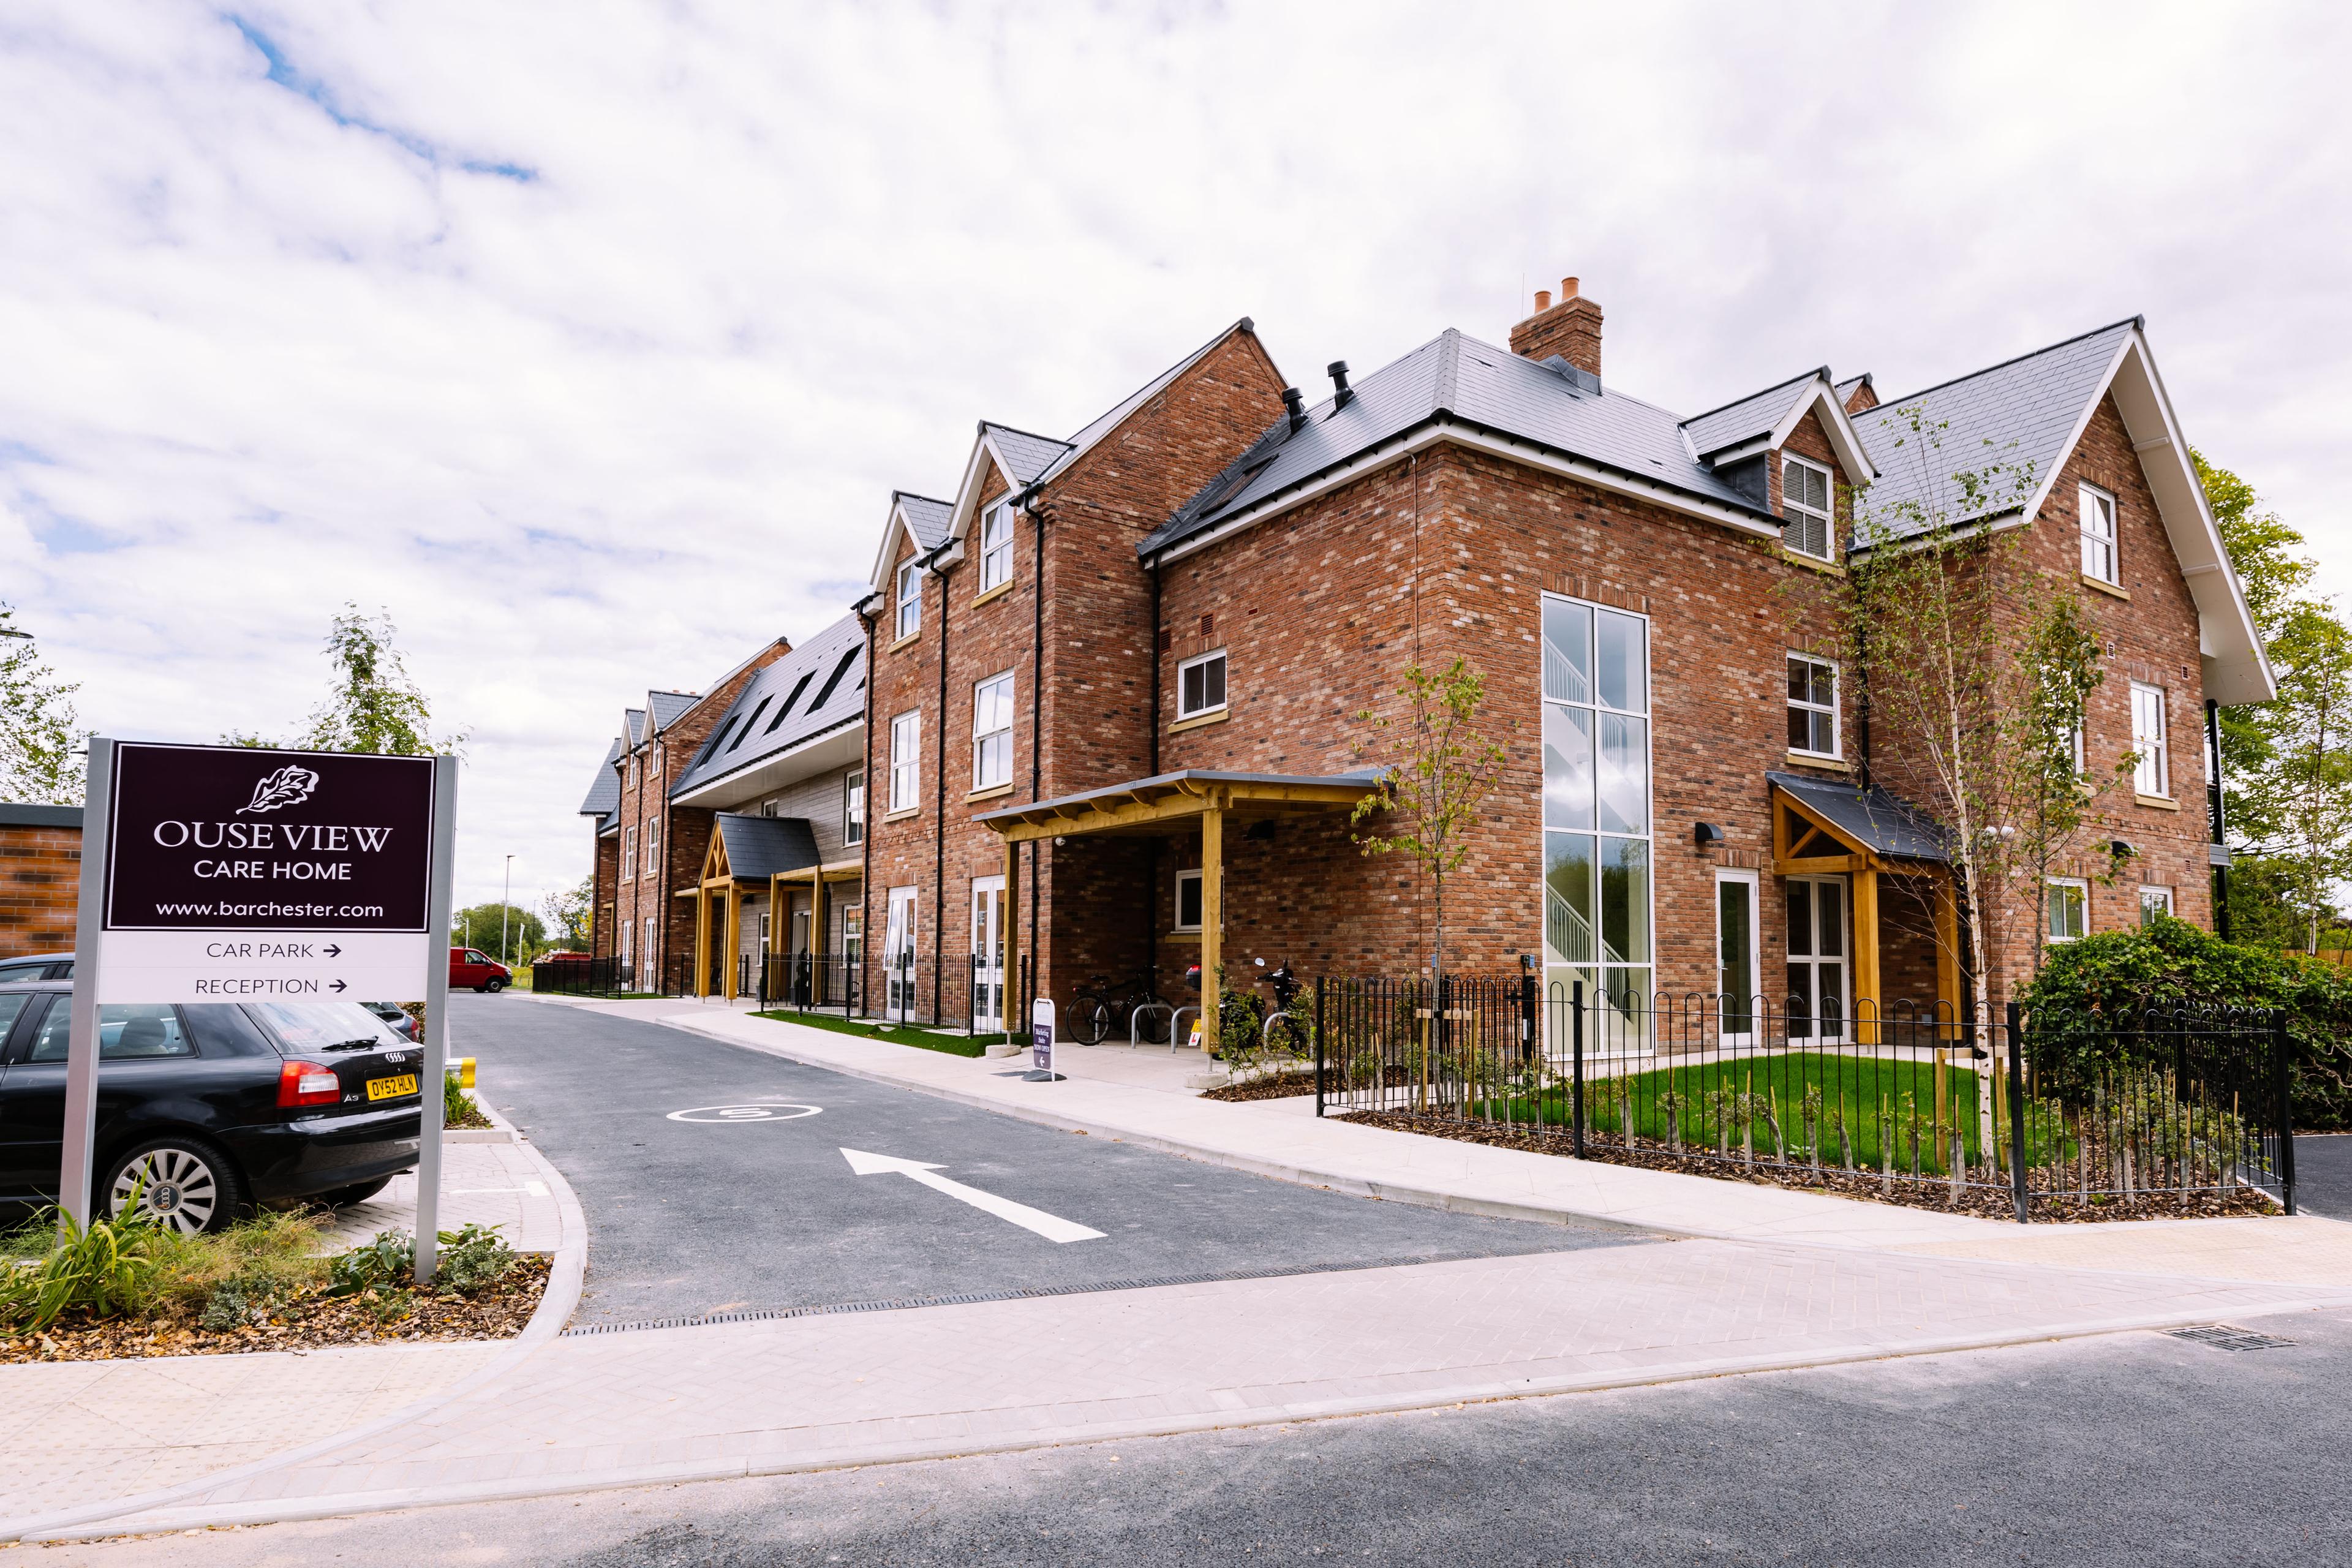 Ouse View Care Home